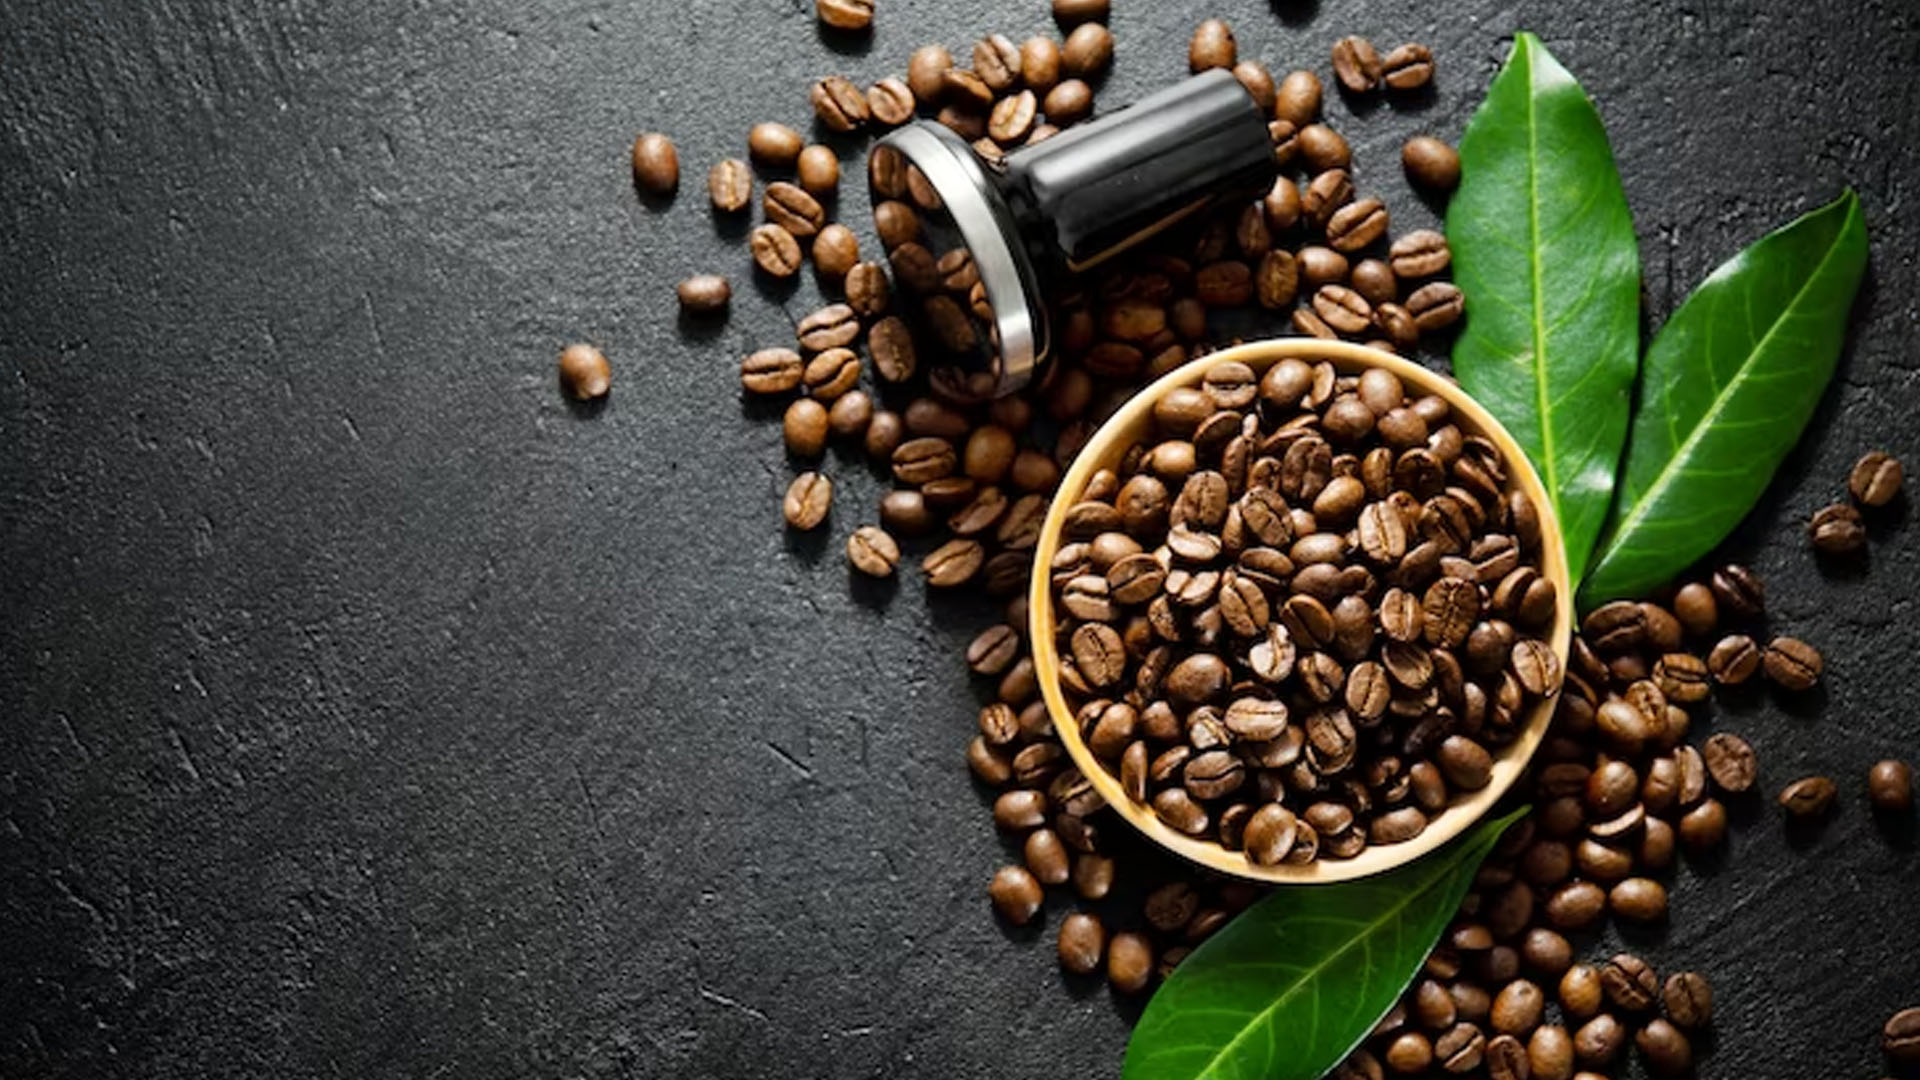 How to Prepare Green Coffee Beans Powder for Health Benefits?